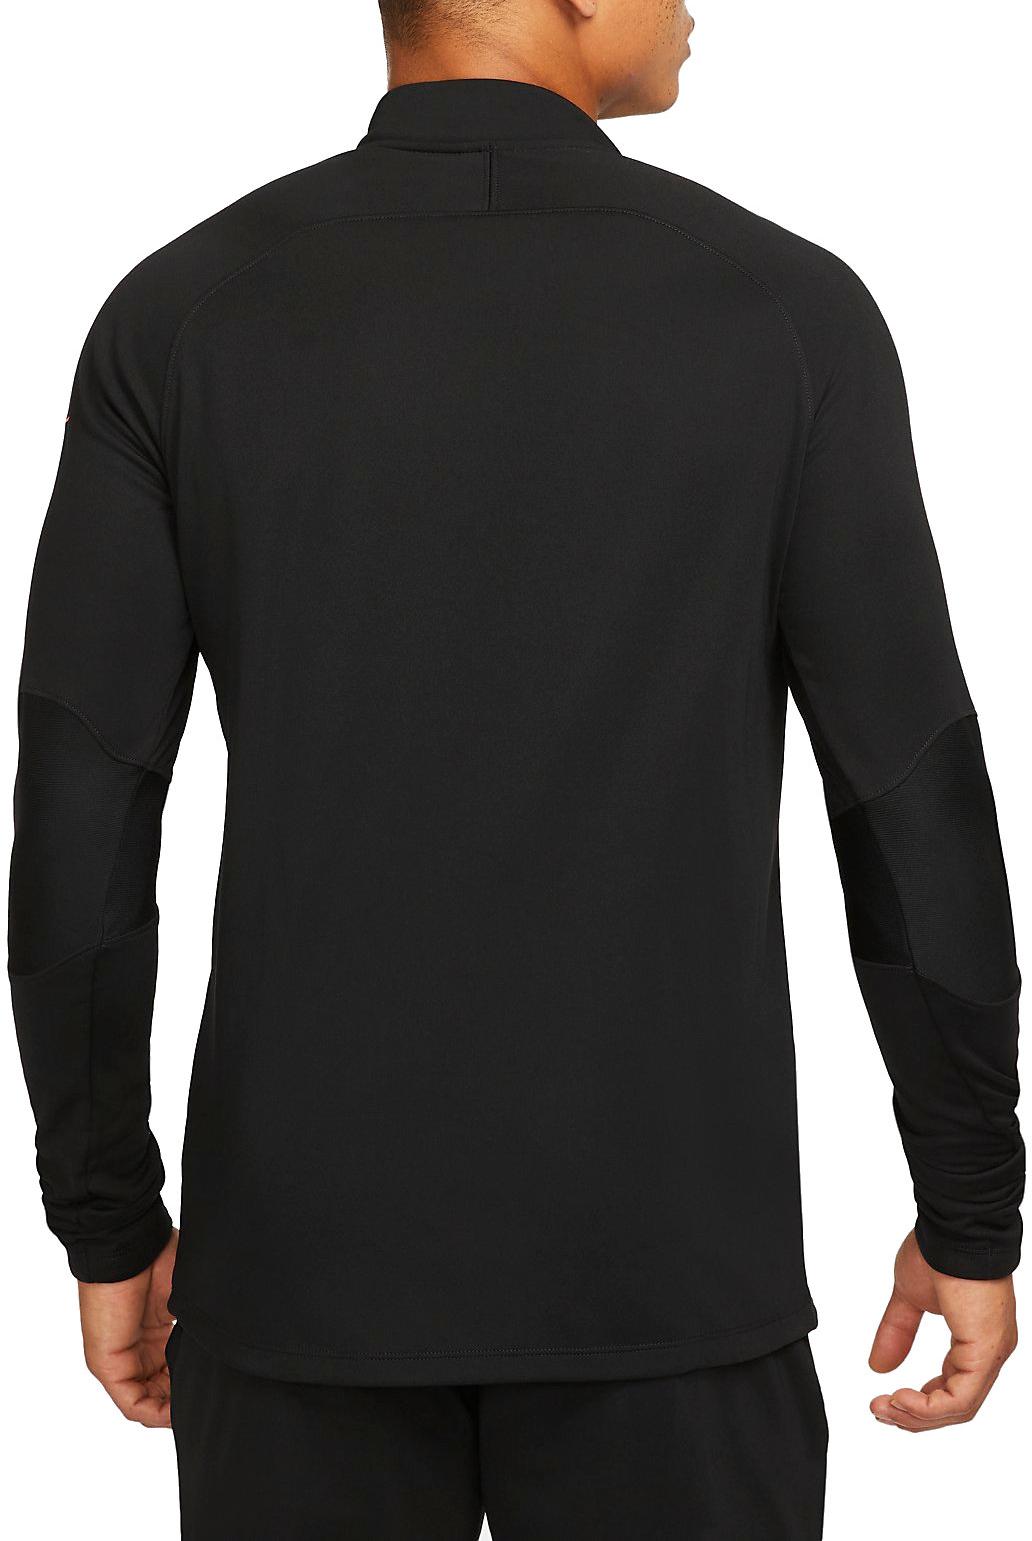 Long-sleeve T-shirt Nike Therma-Fit Academy Winter Warrior Men s Drill Top - Top4Football.com